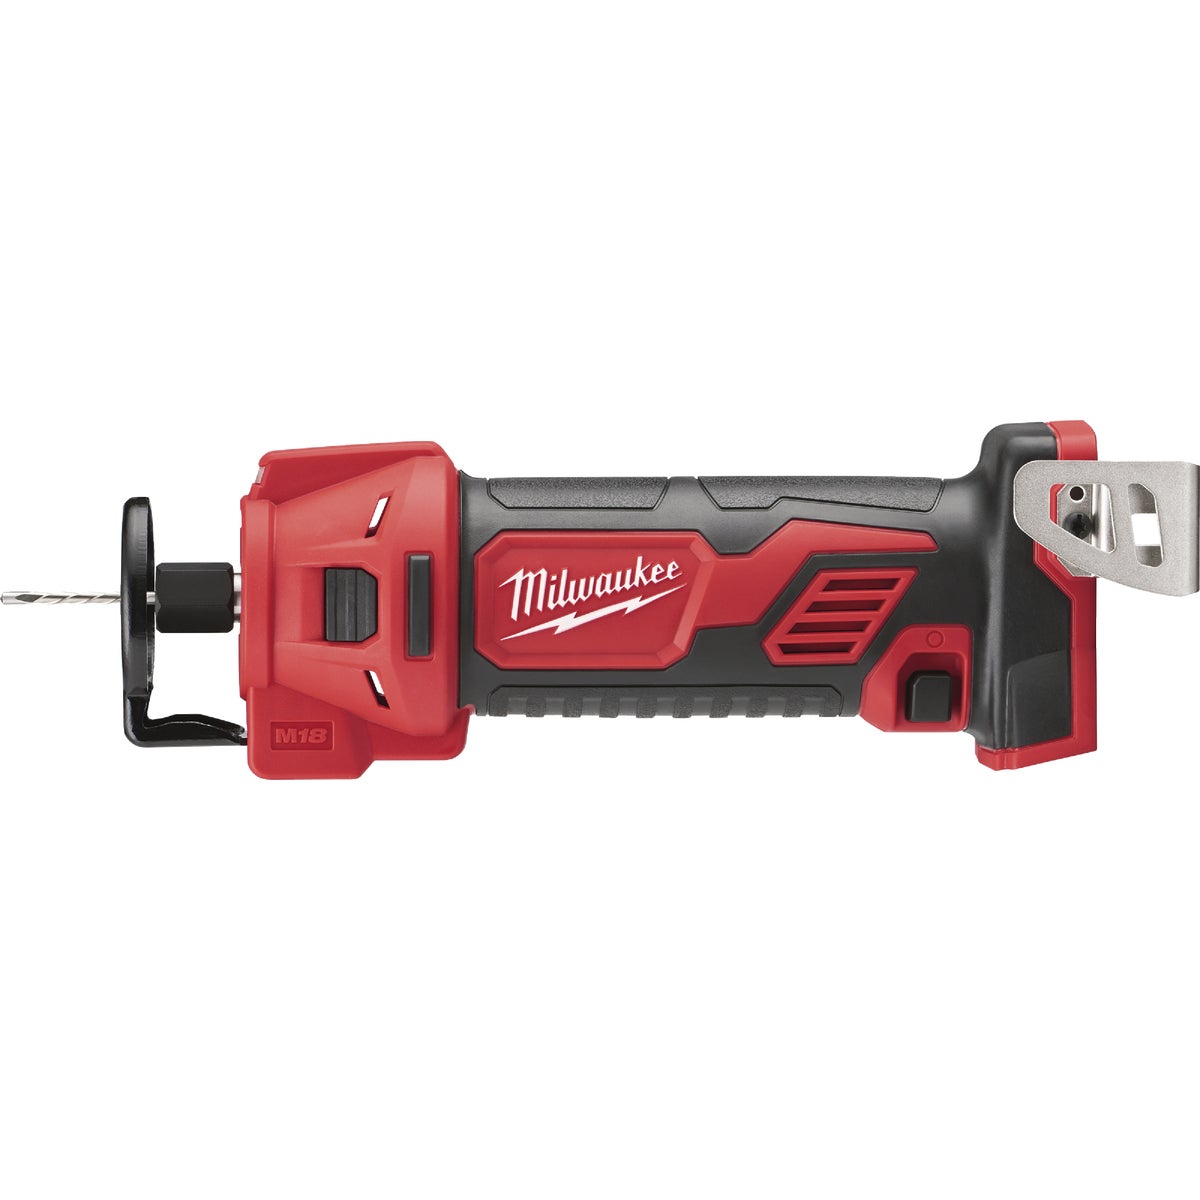 Milwaukee M18 18 Volt Lithium-Ion Cordless Spiral Saw (Tool Only)